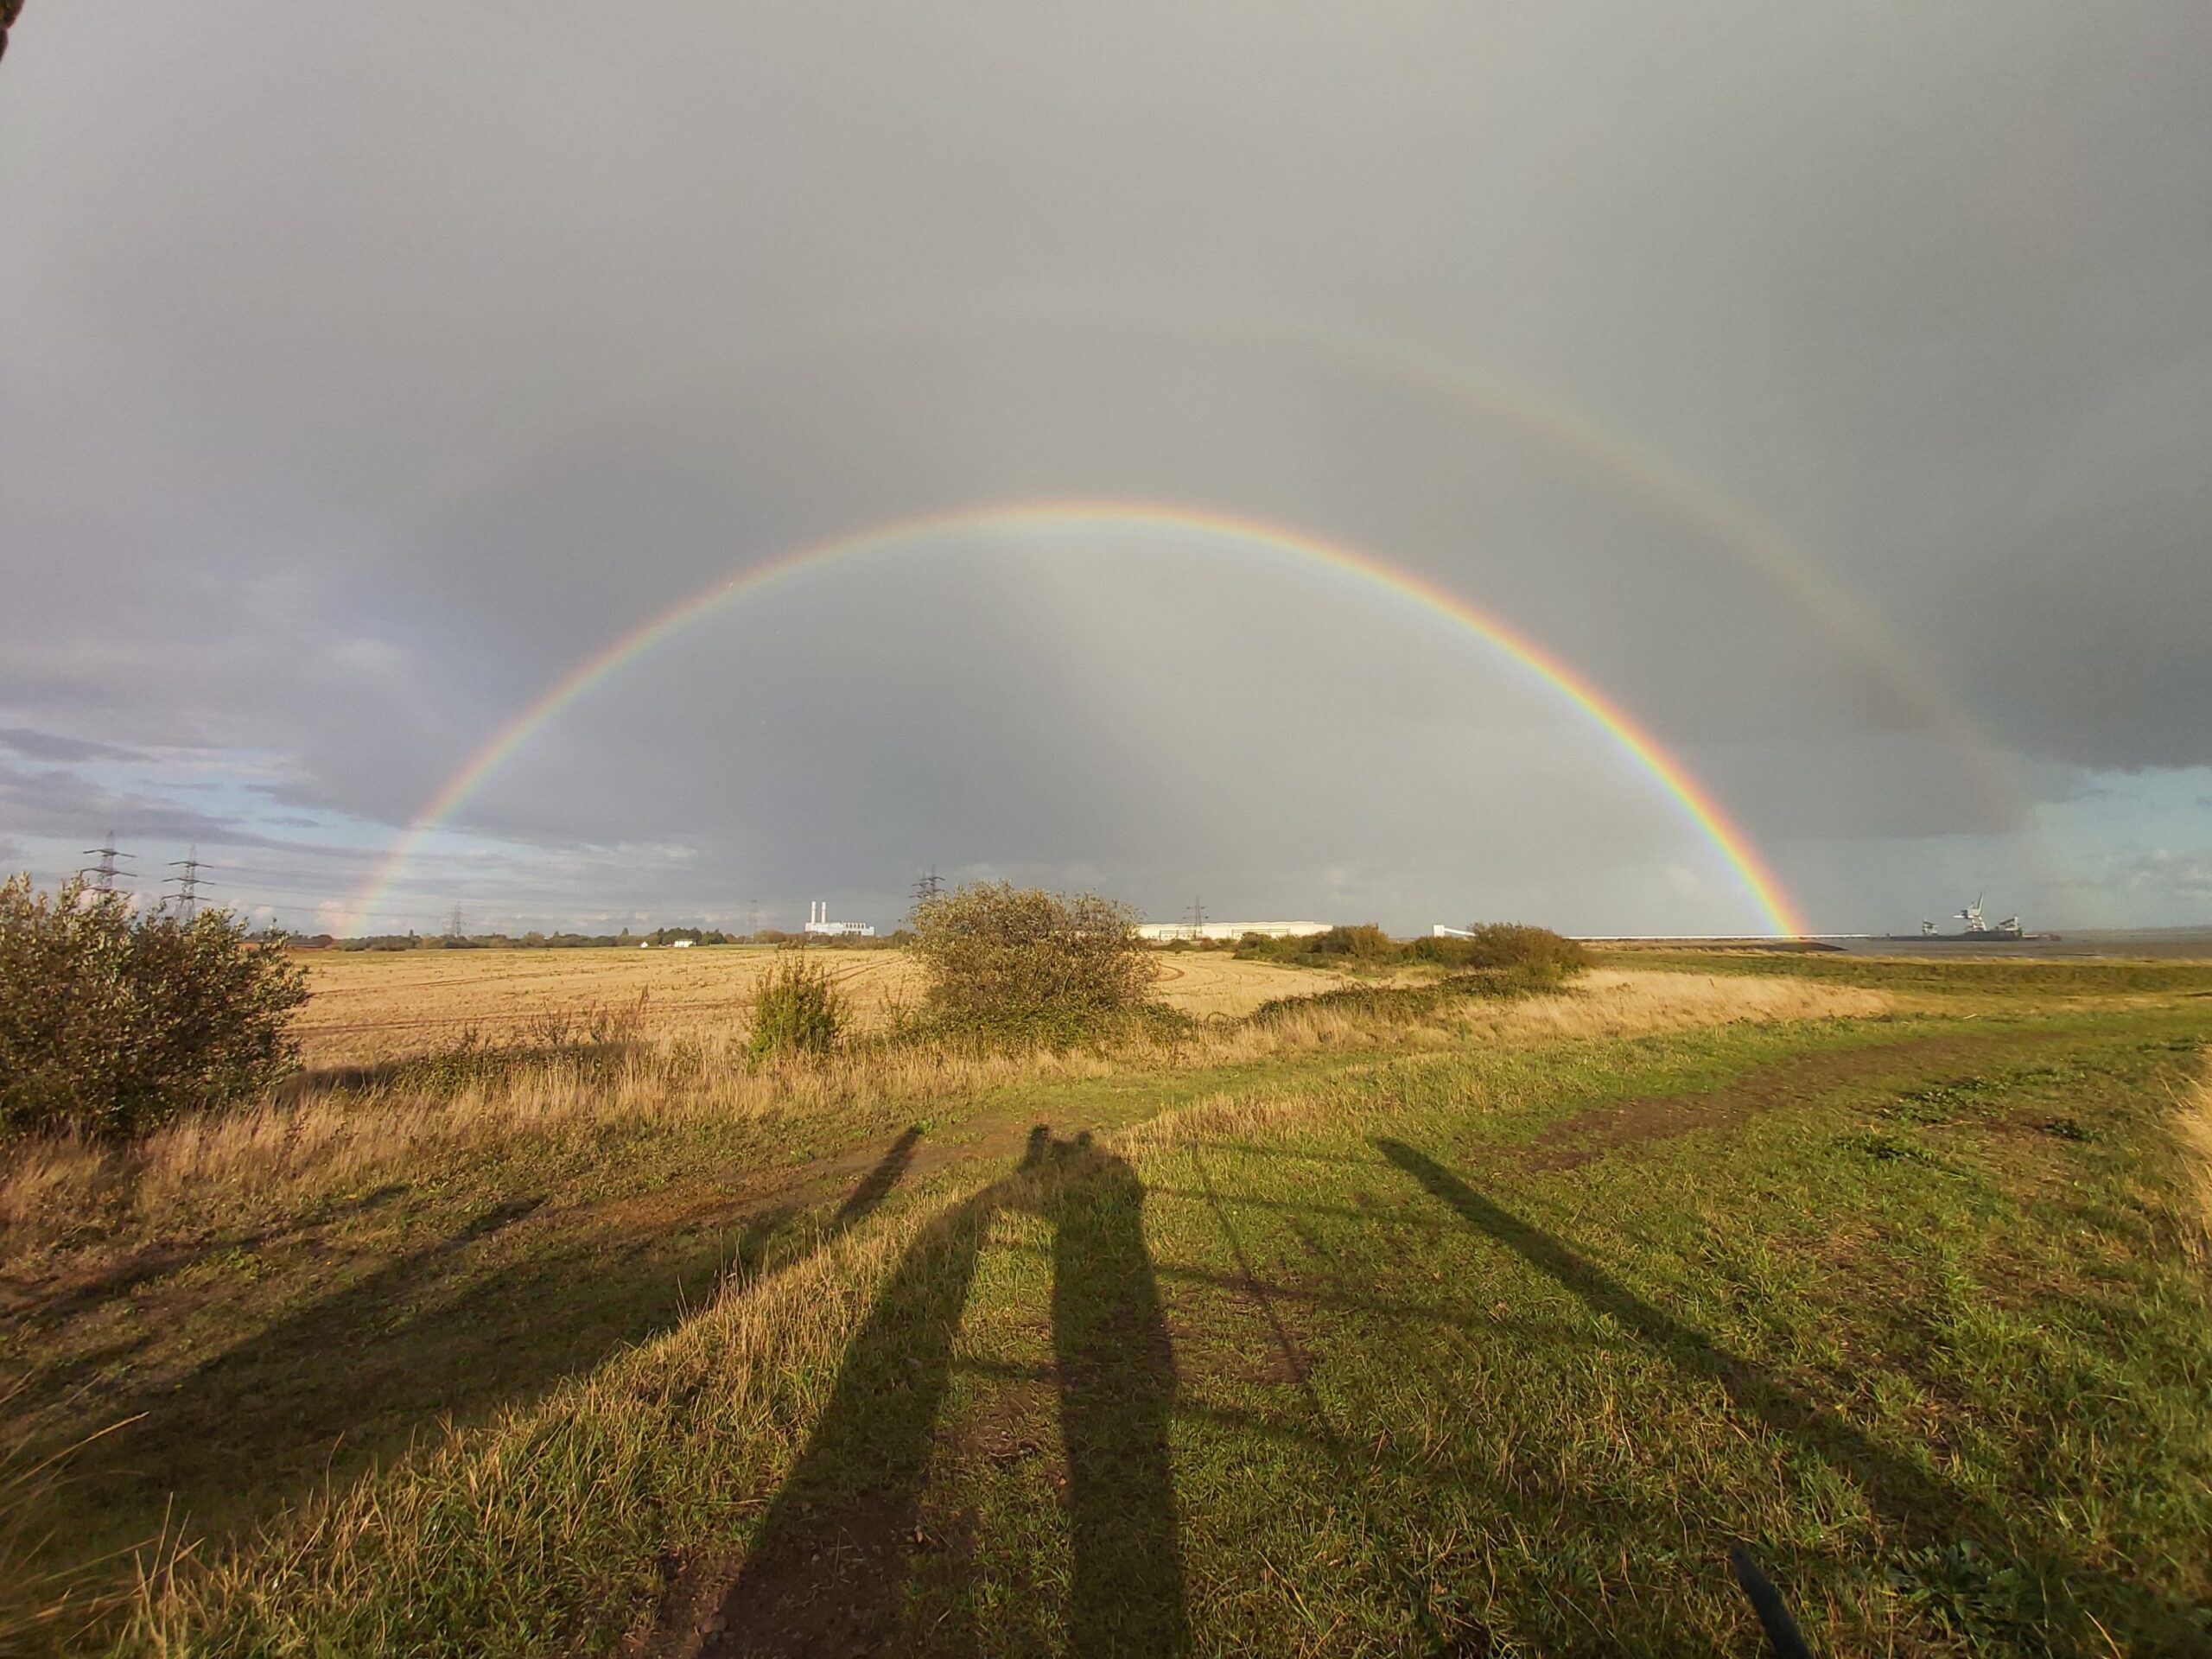 A full double rainbow over the power station in Hoo, Medway, England